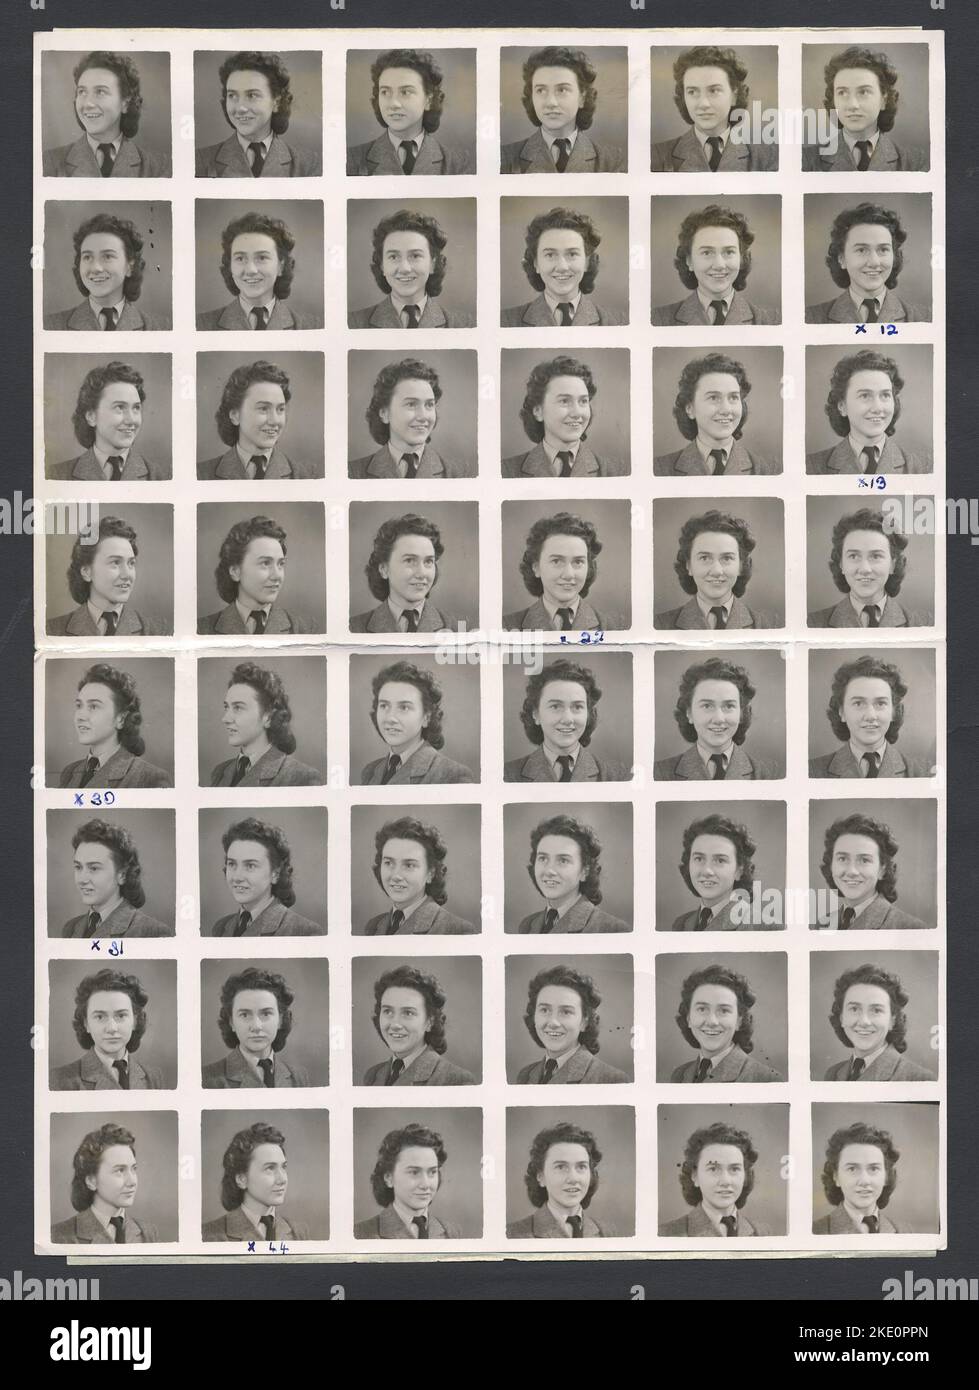 sheet of Polyfoto portraits, with a date of 1946. Woman Dressed in a nice jacket with a shirt and tie, working for a public service occupation where smart dress was required.  Polyfoto sheet of 48 poses.  Polyfoto operated kiosks around Britain and Europe, supplying these proof sheets from which customers chose frames to order as enlargements.   They opened in 1933 and only closed in the late 1960s.  Photographic history. Stock Photo